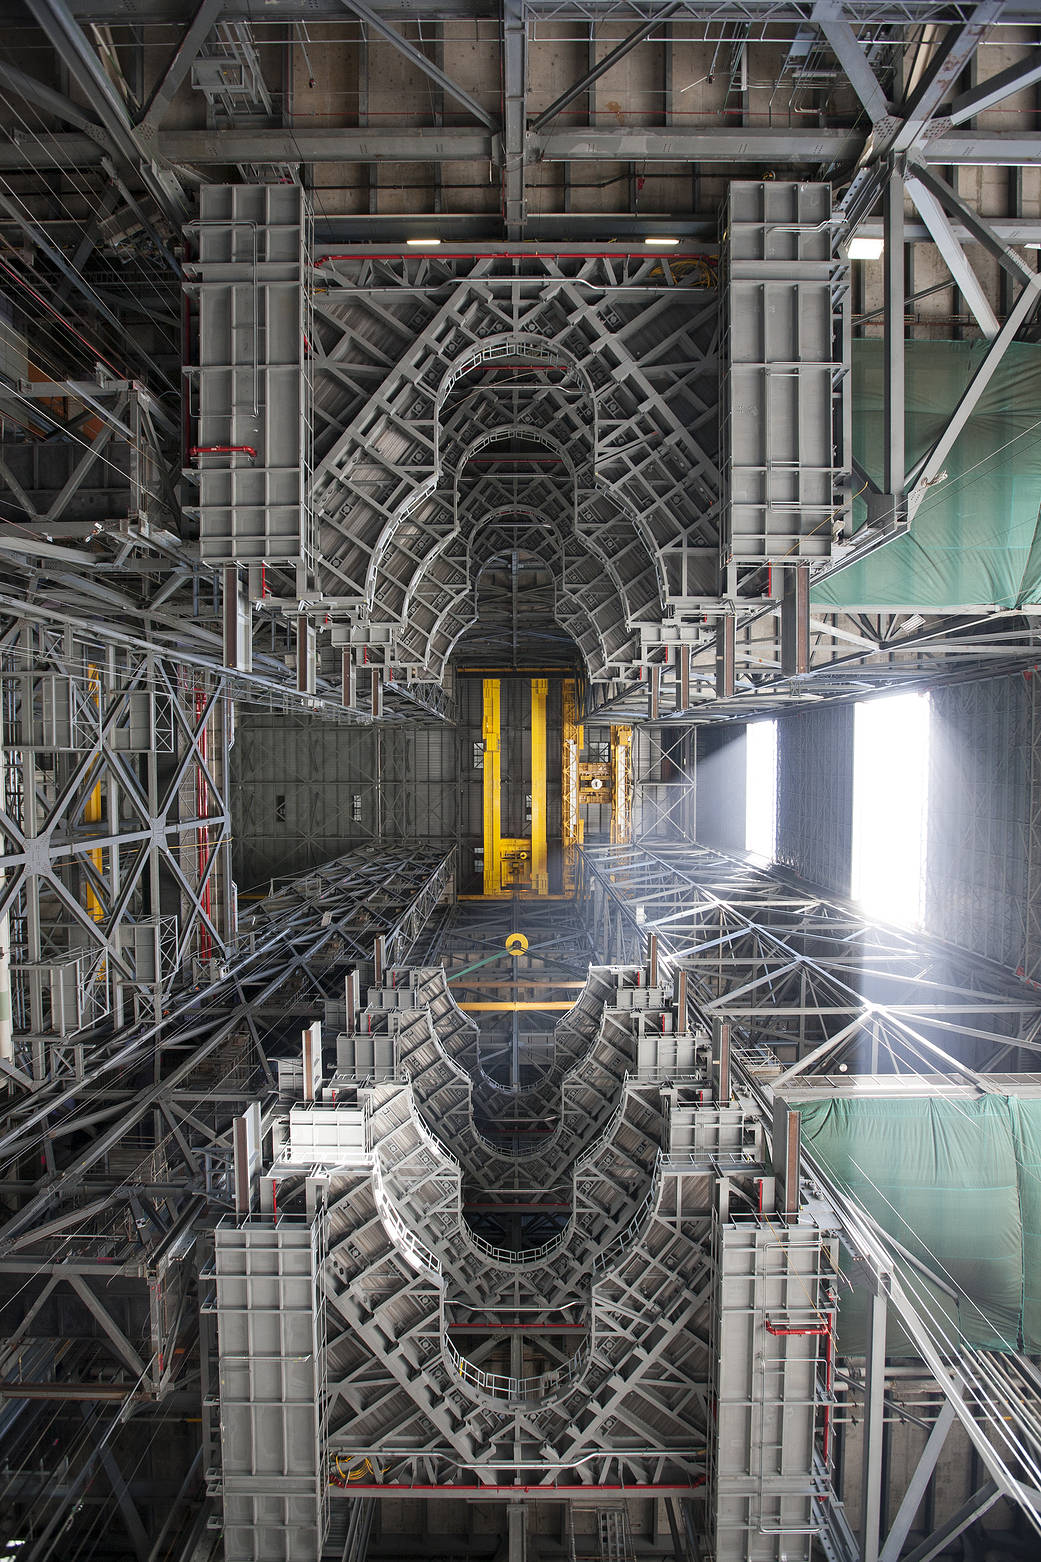 View of upper floors of Vehicle Assembly Building taken from ground